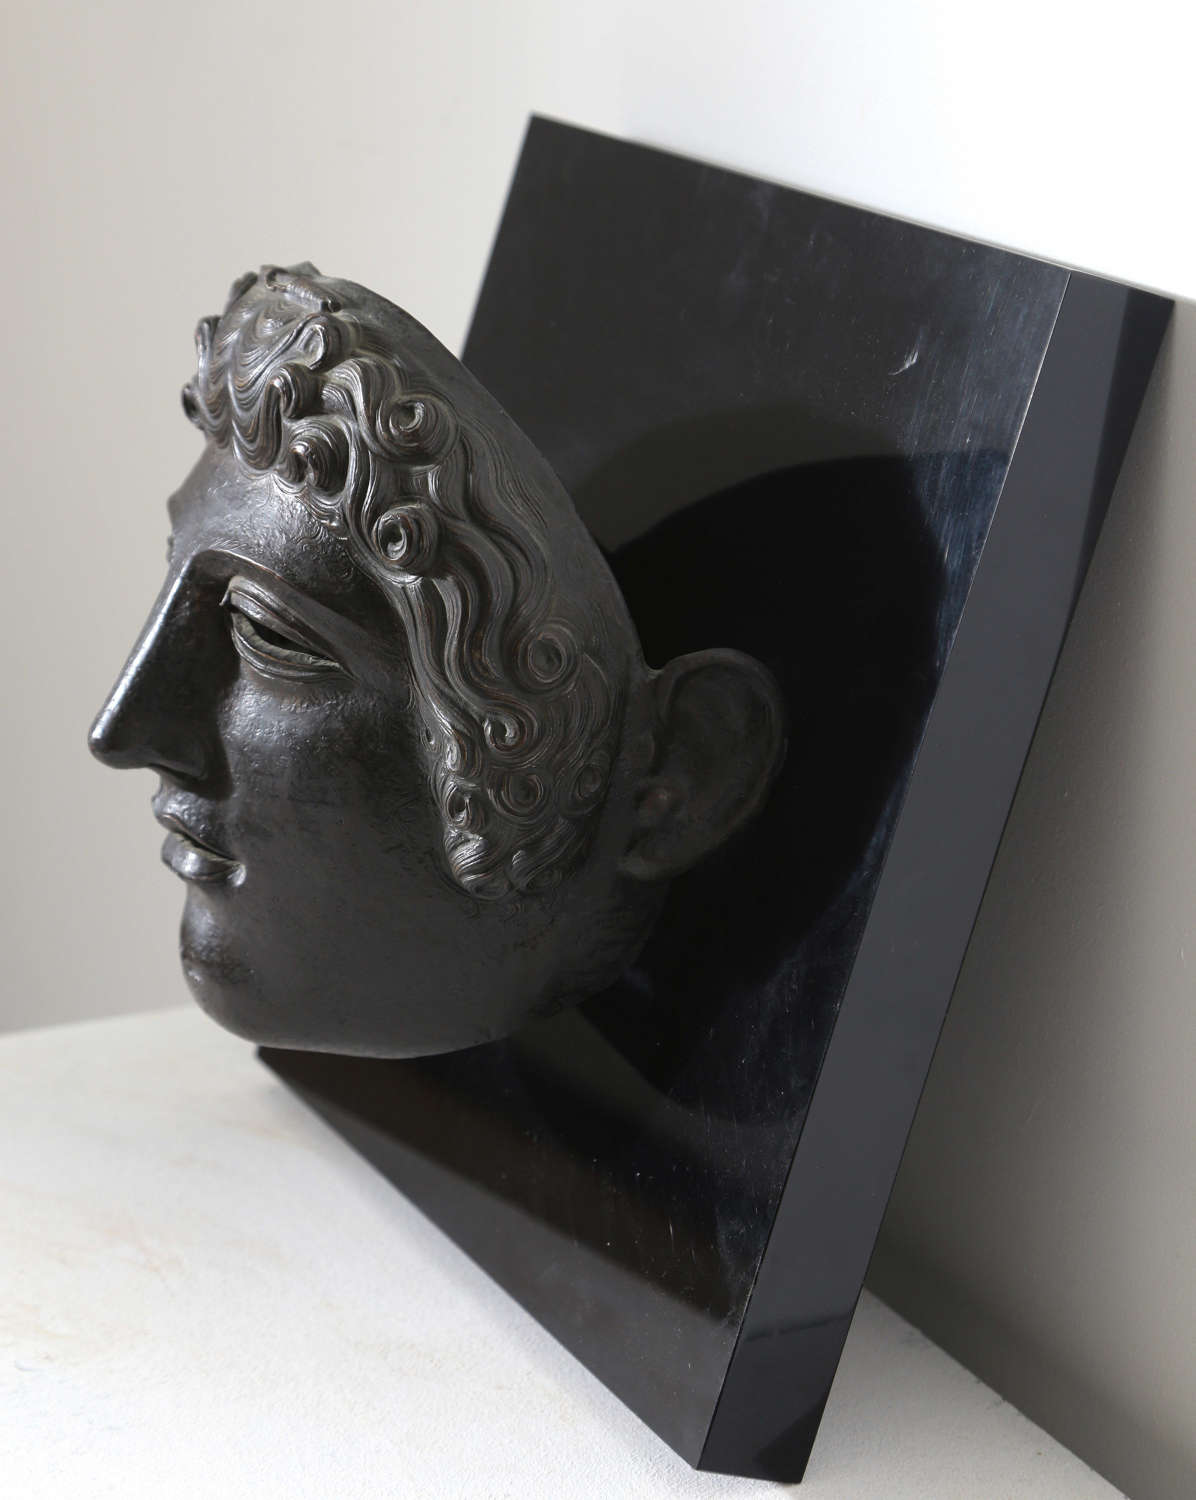 20th century mask of a gladiator mounted on a plaque